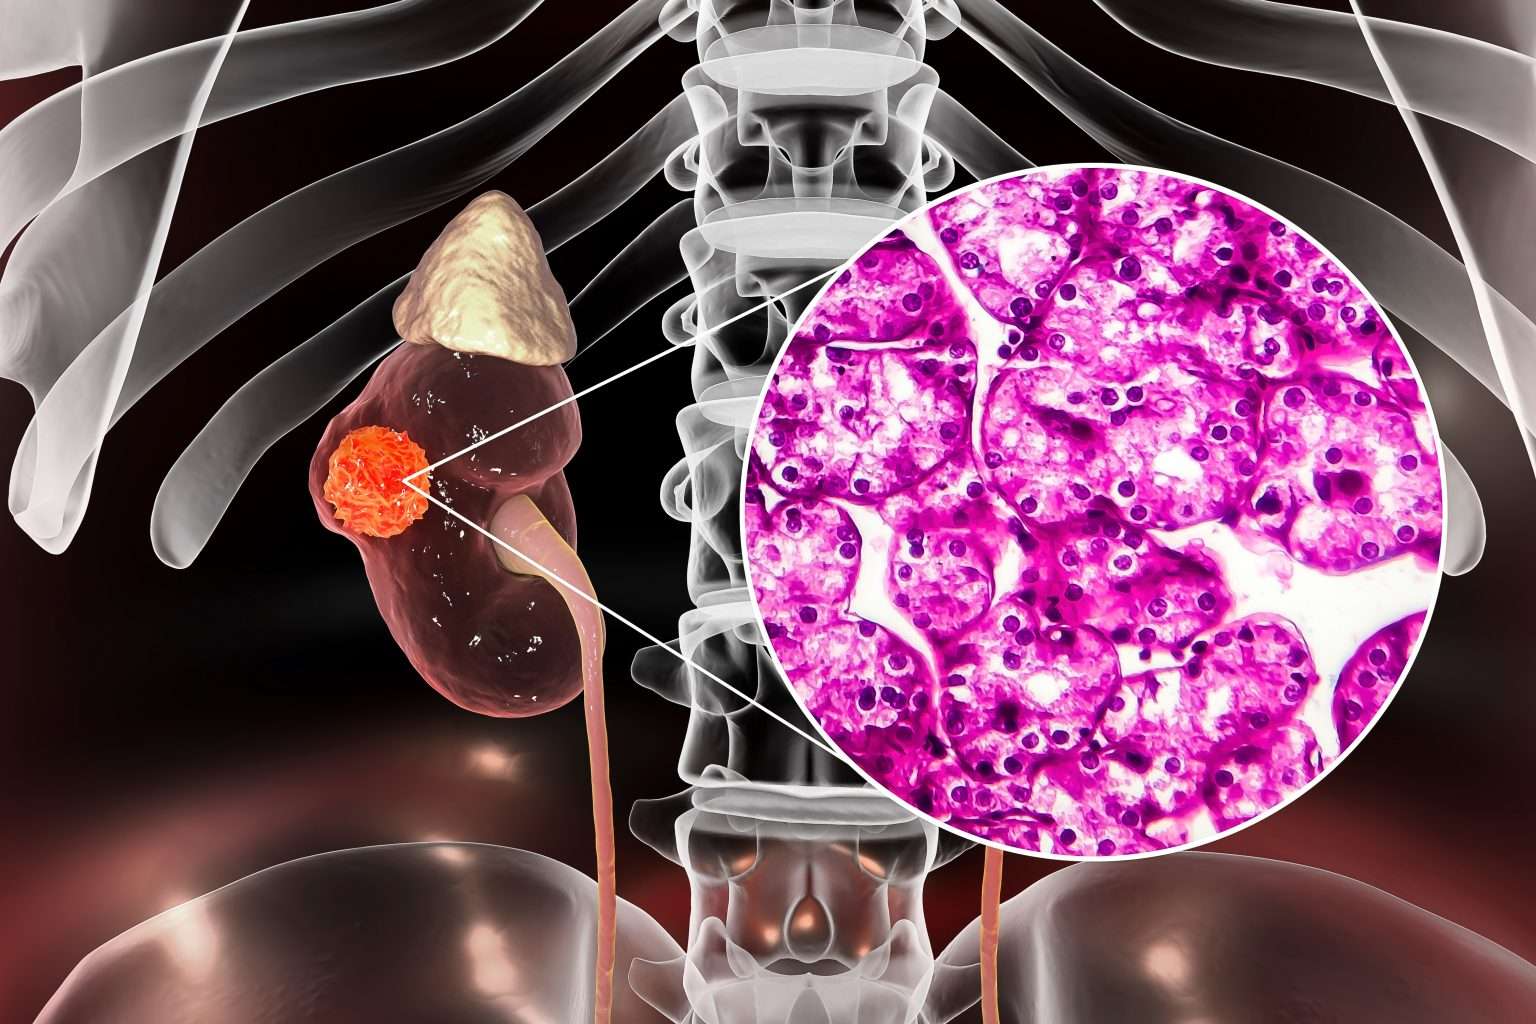 Novel target could improve treatments for renal cell carcinoma